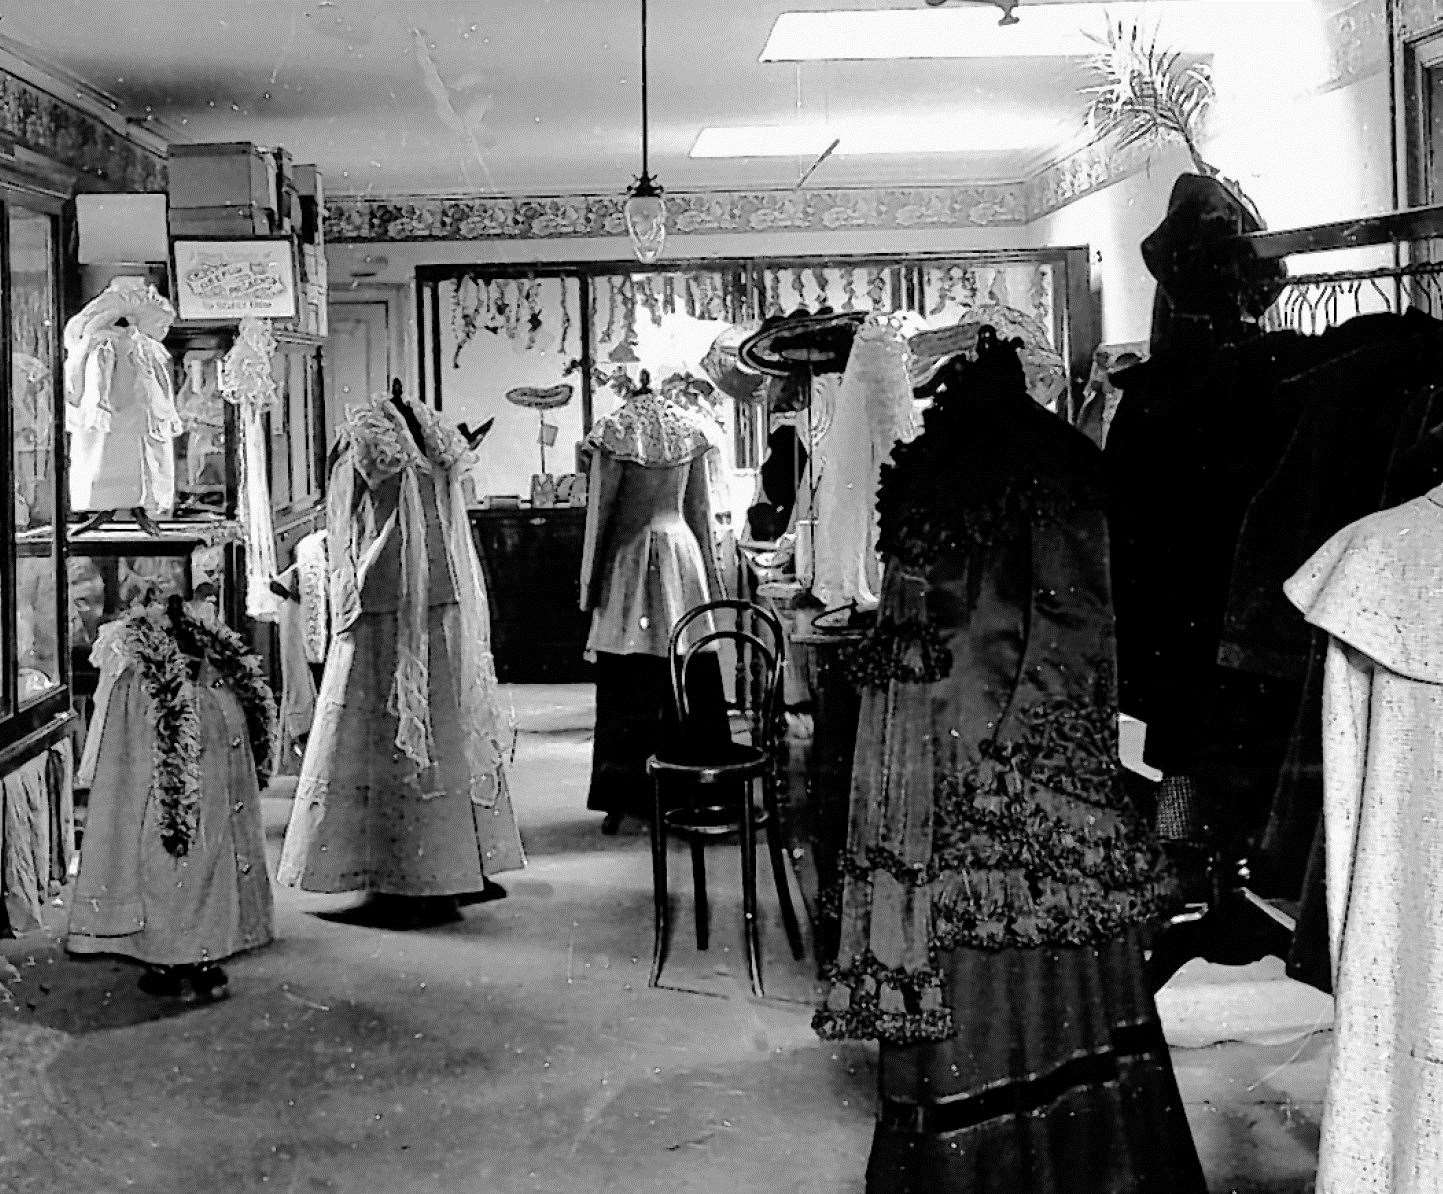 A display area in the premises of G D Robertson, draper, 20 Bridge Street, Wick. The shop was later taken over by William G Mowat, Wick’s former provost.